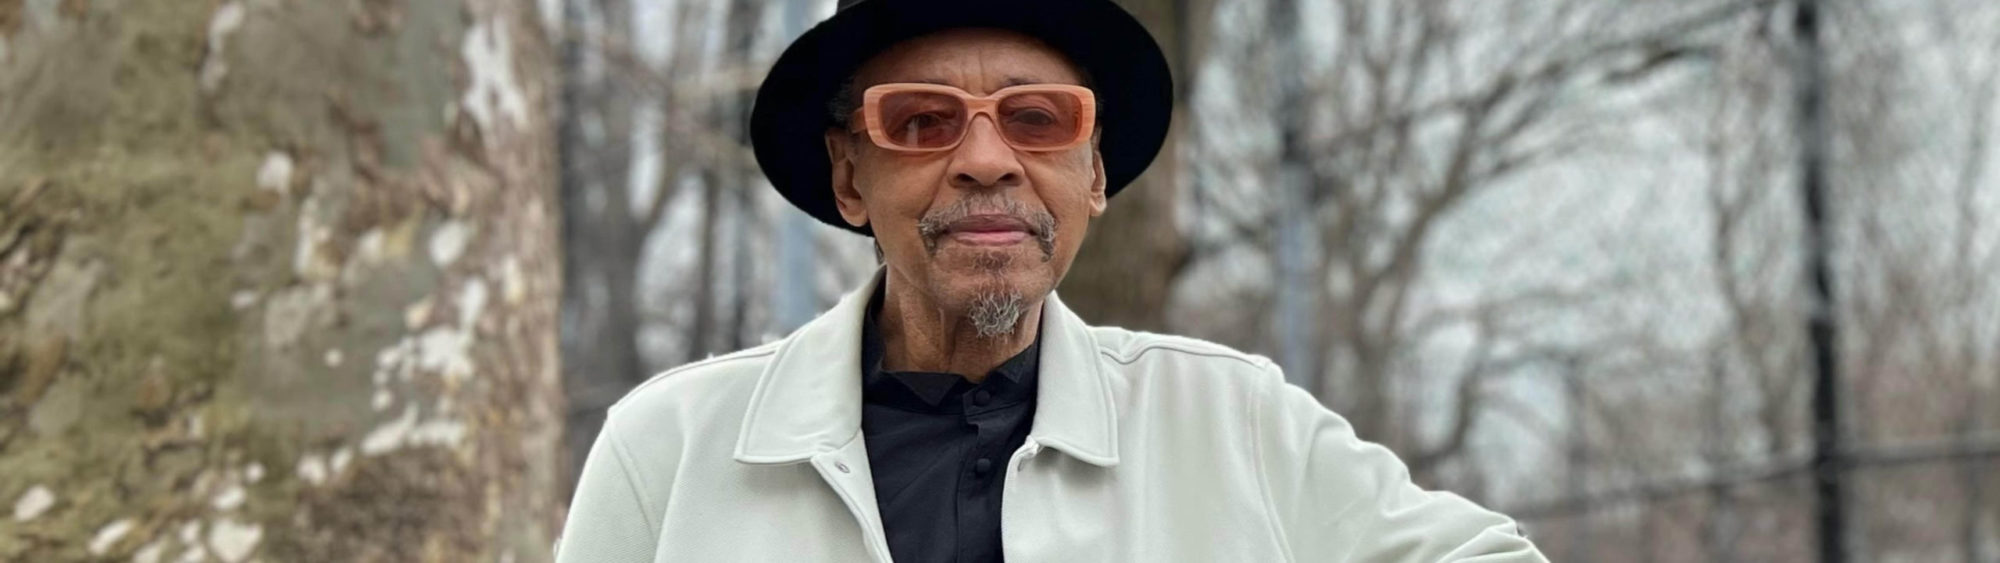 Henry Threadgill wearing pink sunglasses, a black hat, and a white jacket.